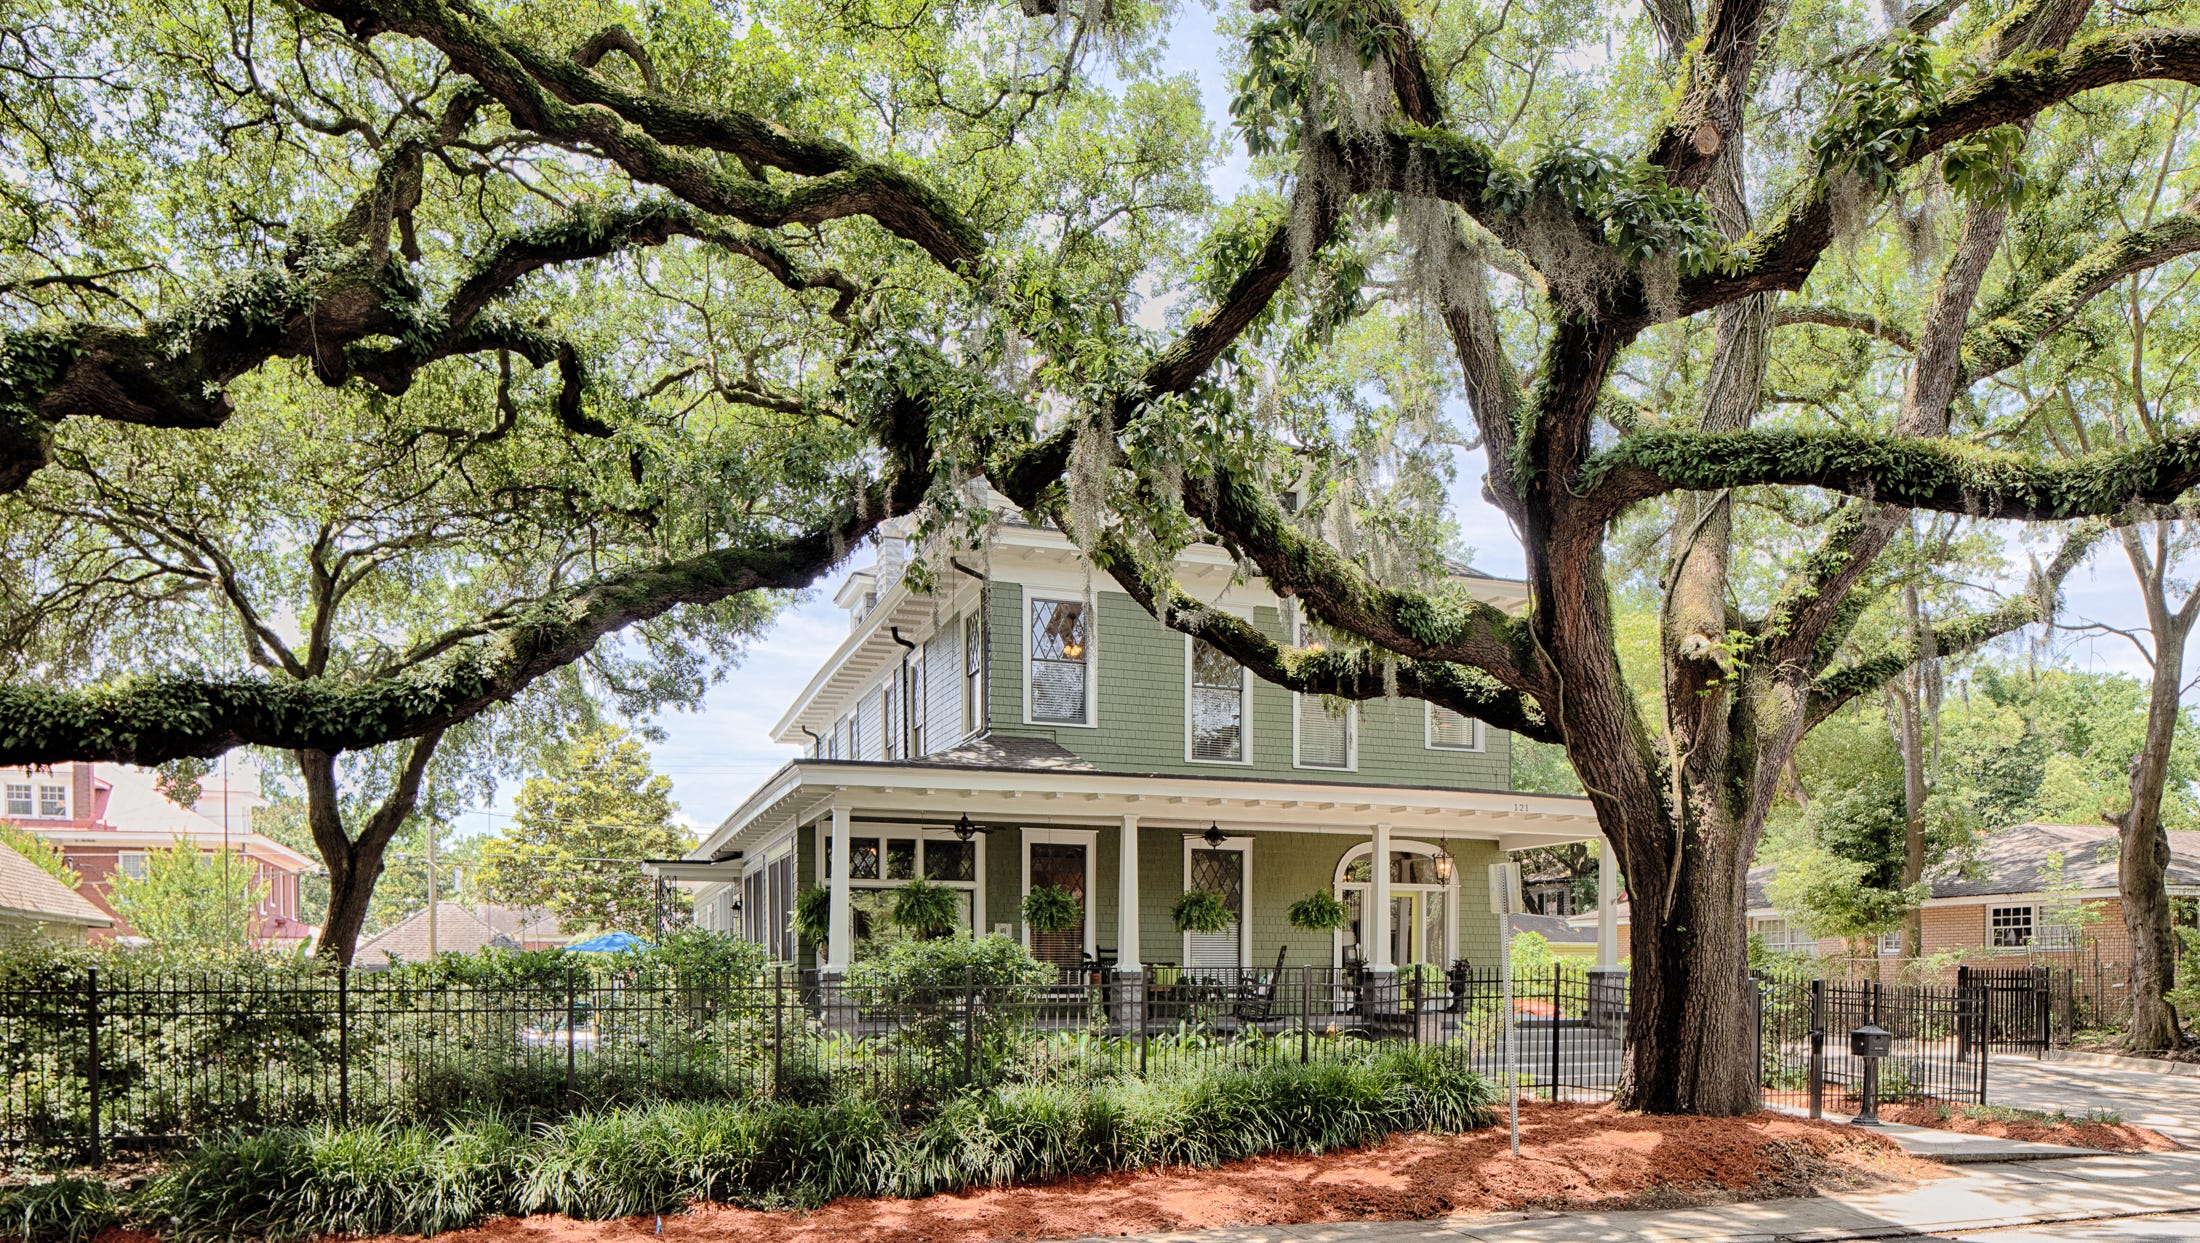 Savannah, Georgia, is a hot real estate market for vacation homes